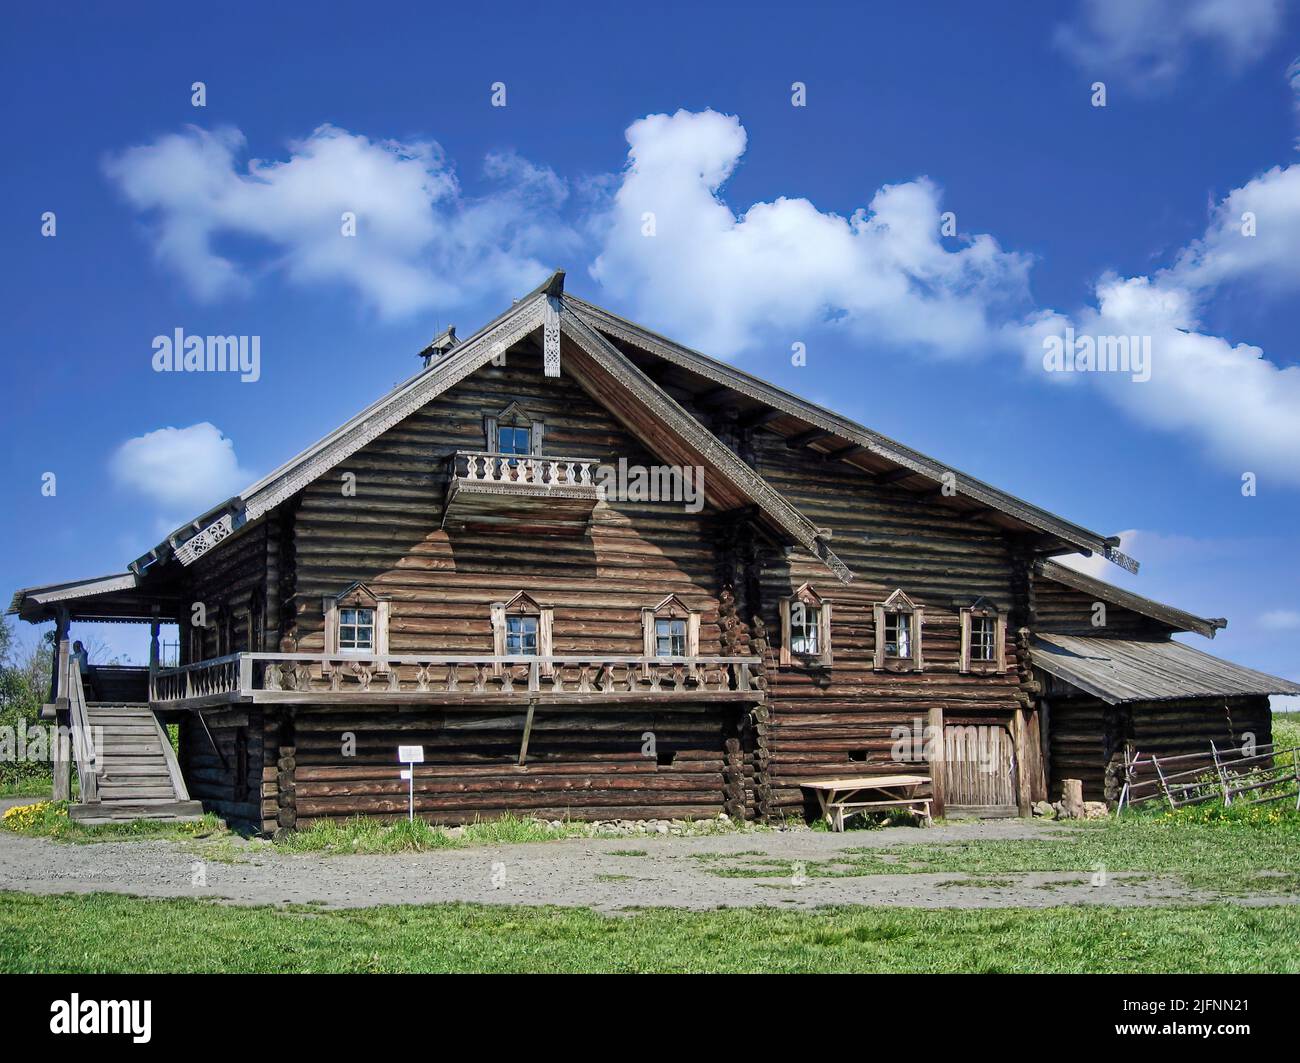 Kiži is an island located in Karelia Russia, characterized by wooden churches, and houses.It is one of the most popular tourist destinations in Russia Stock Photo